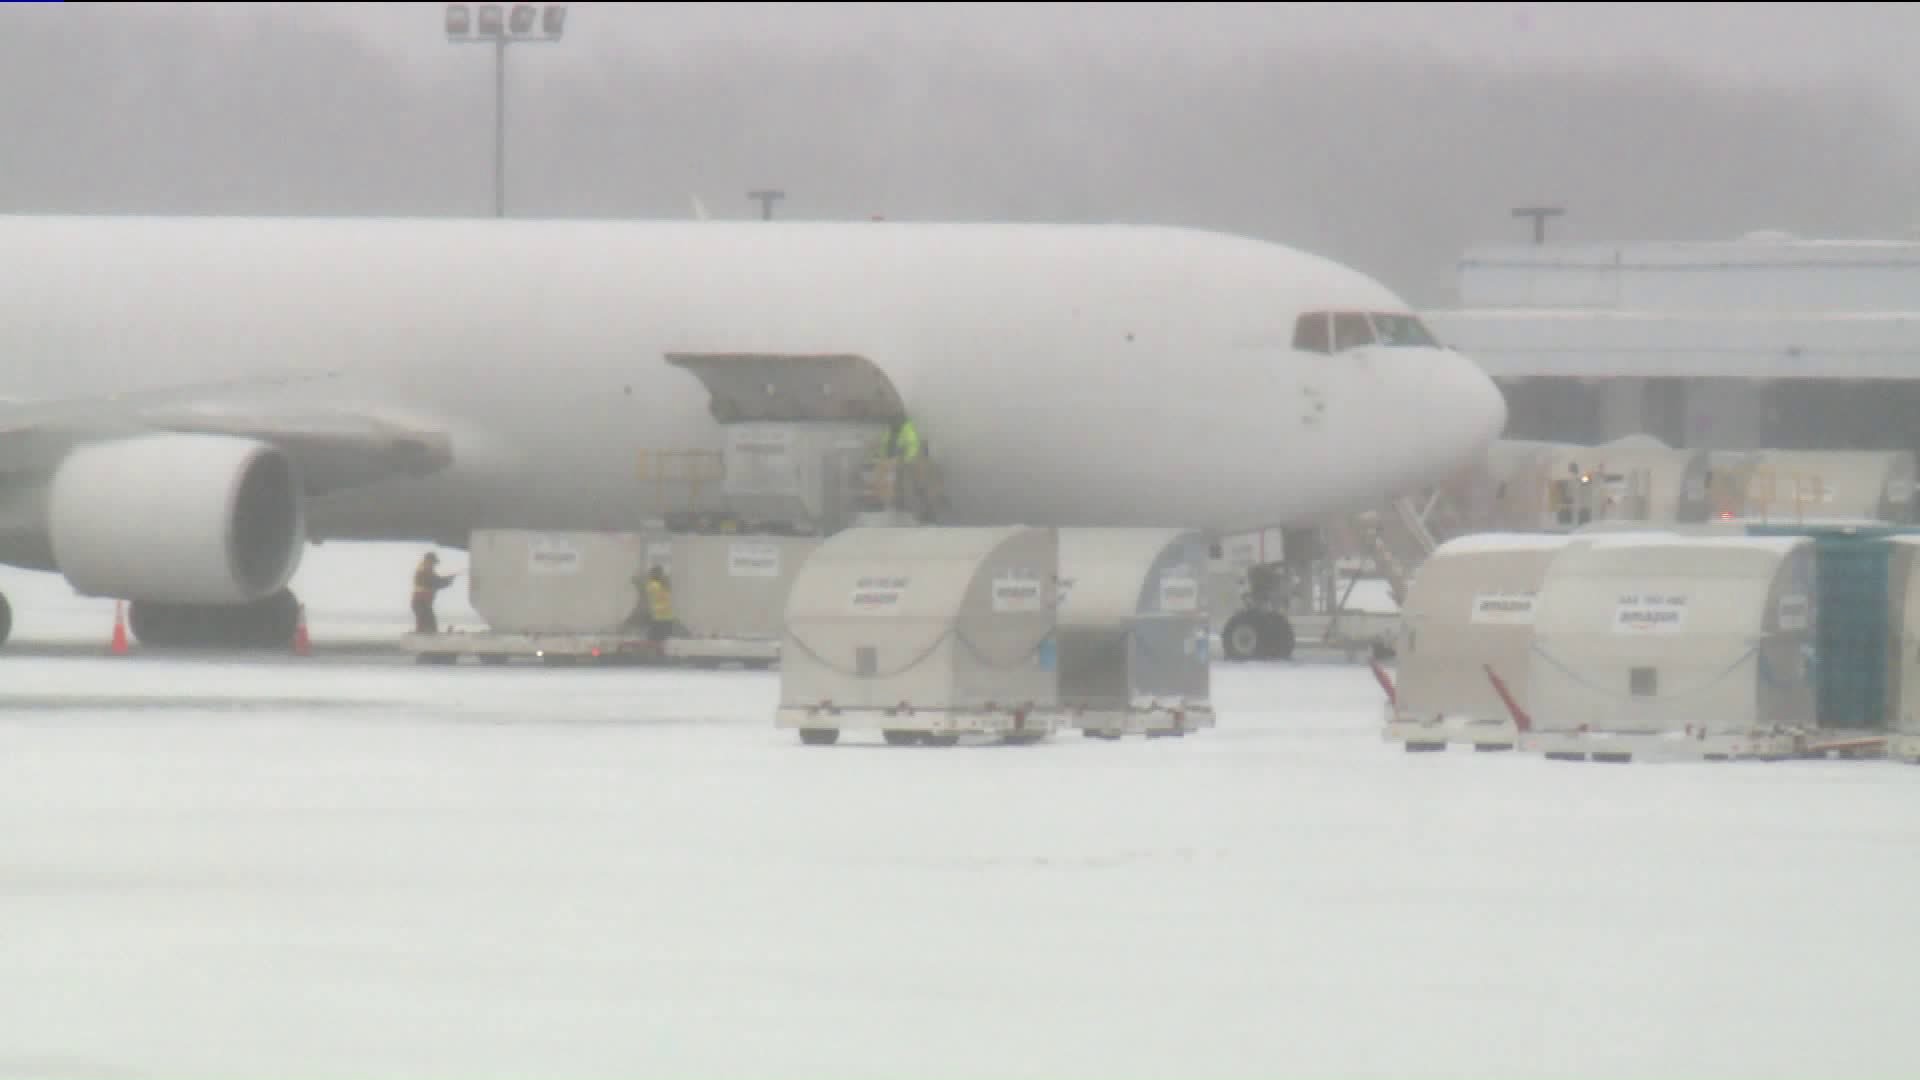 Winter storm impacts disrupts post-Thanksgiving travel at Bradley International Airport